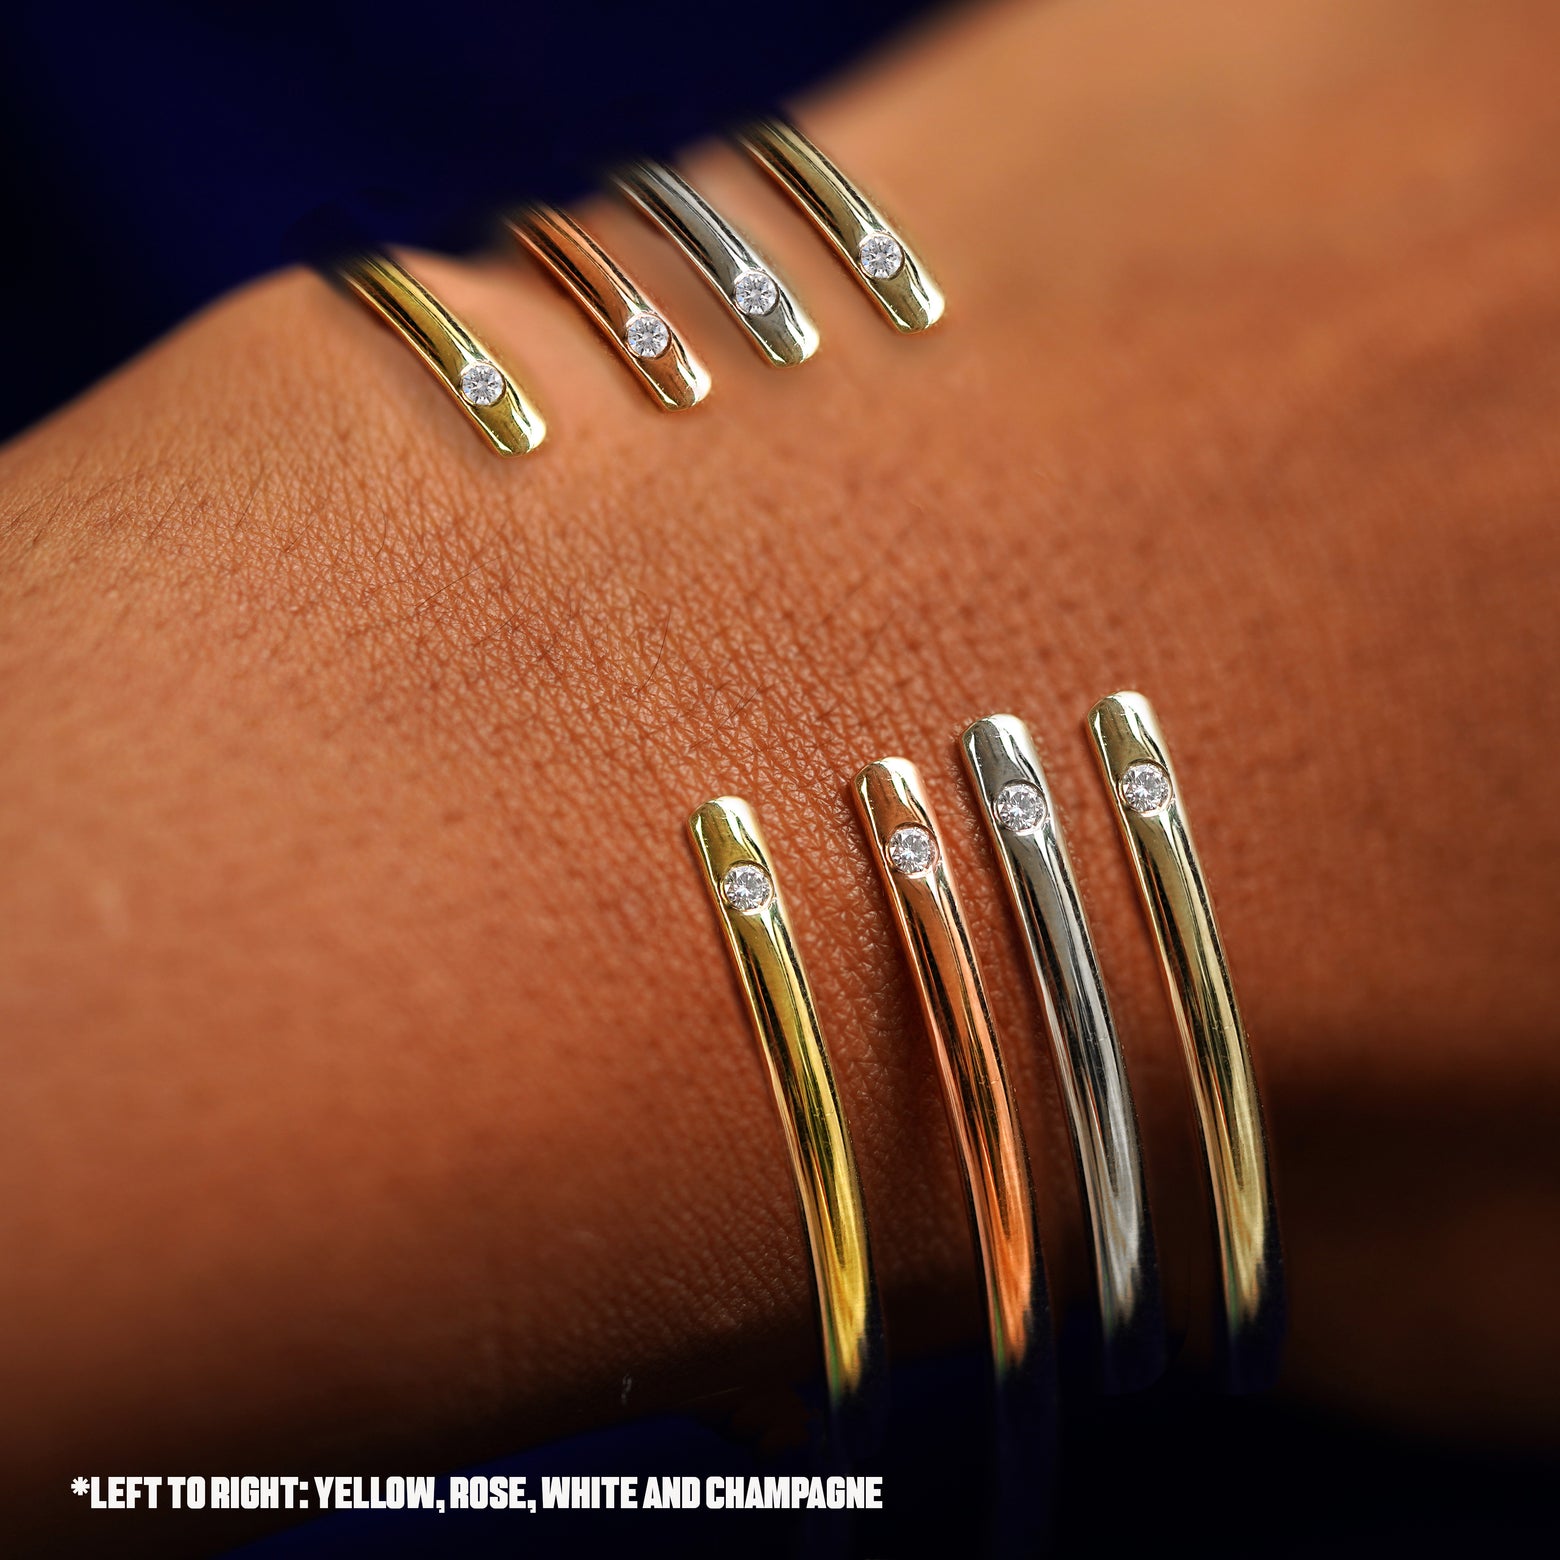 A model's wrist wearing four versions of the Diamond Open Bangle in options of rose, yellow, champagne, and white gold